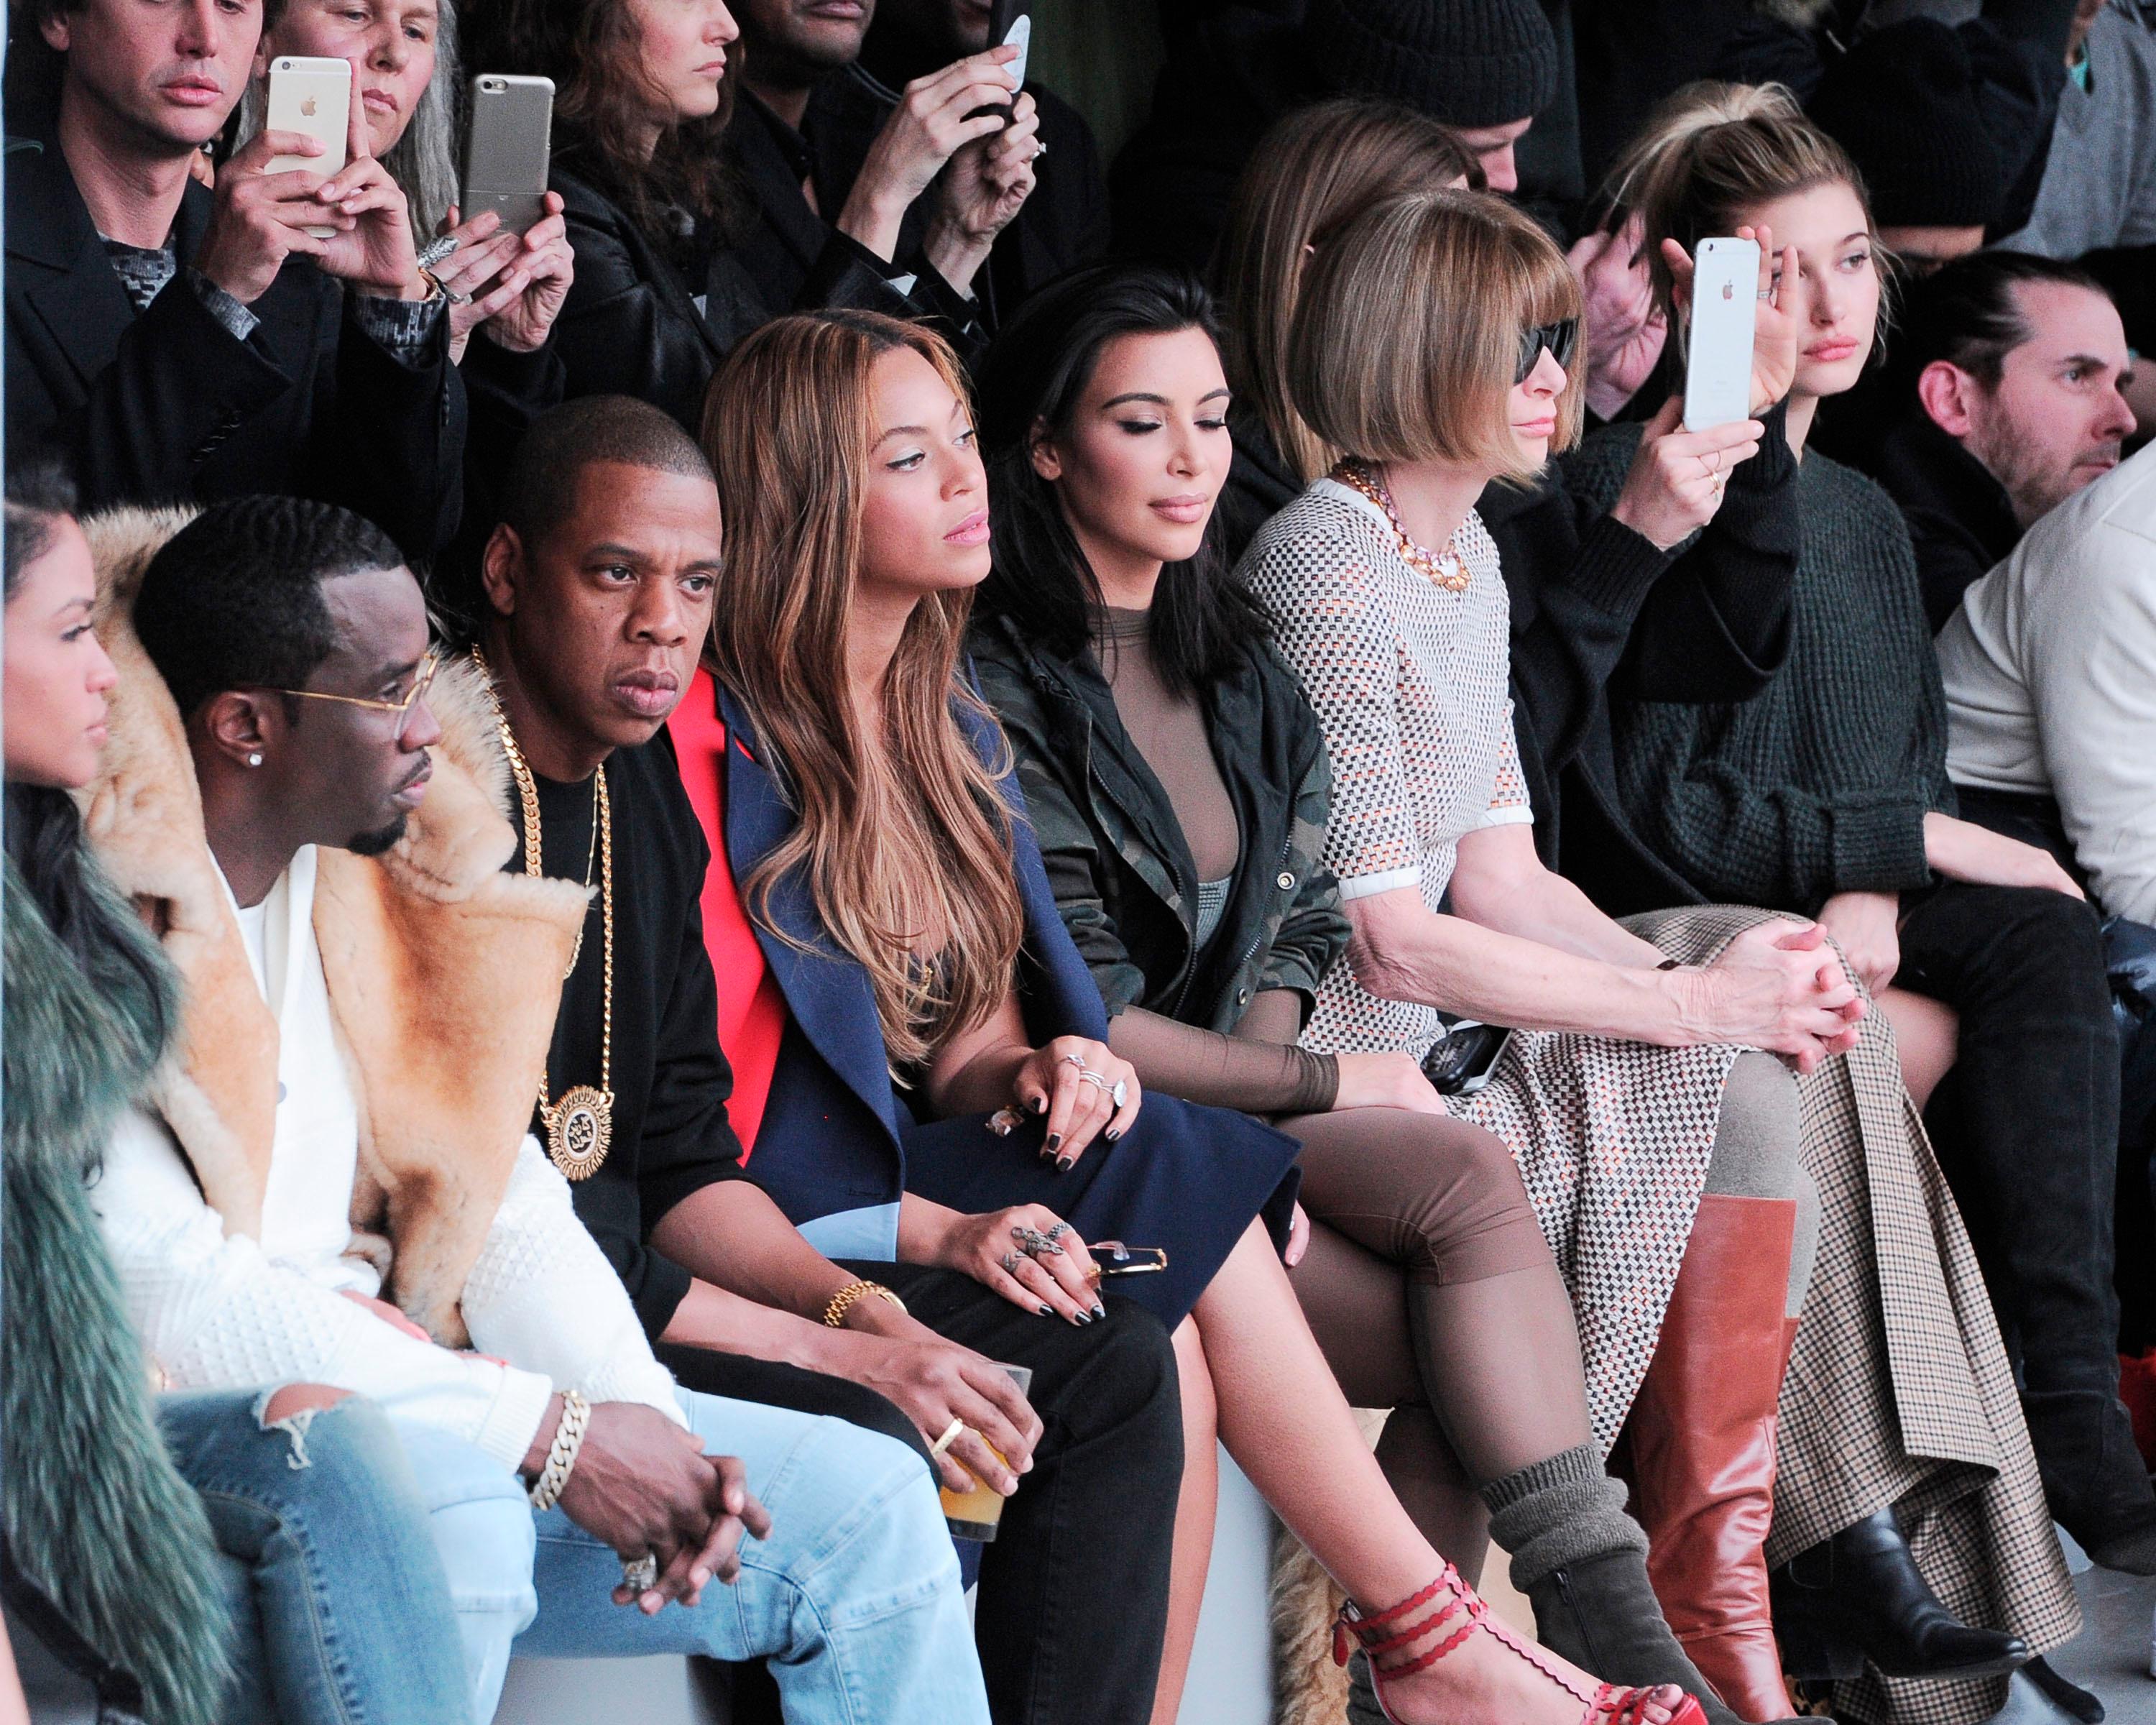 Check Out The Star-Studded Front Row At The Kanye West x Adidas Show ...